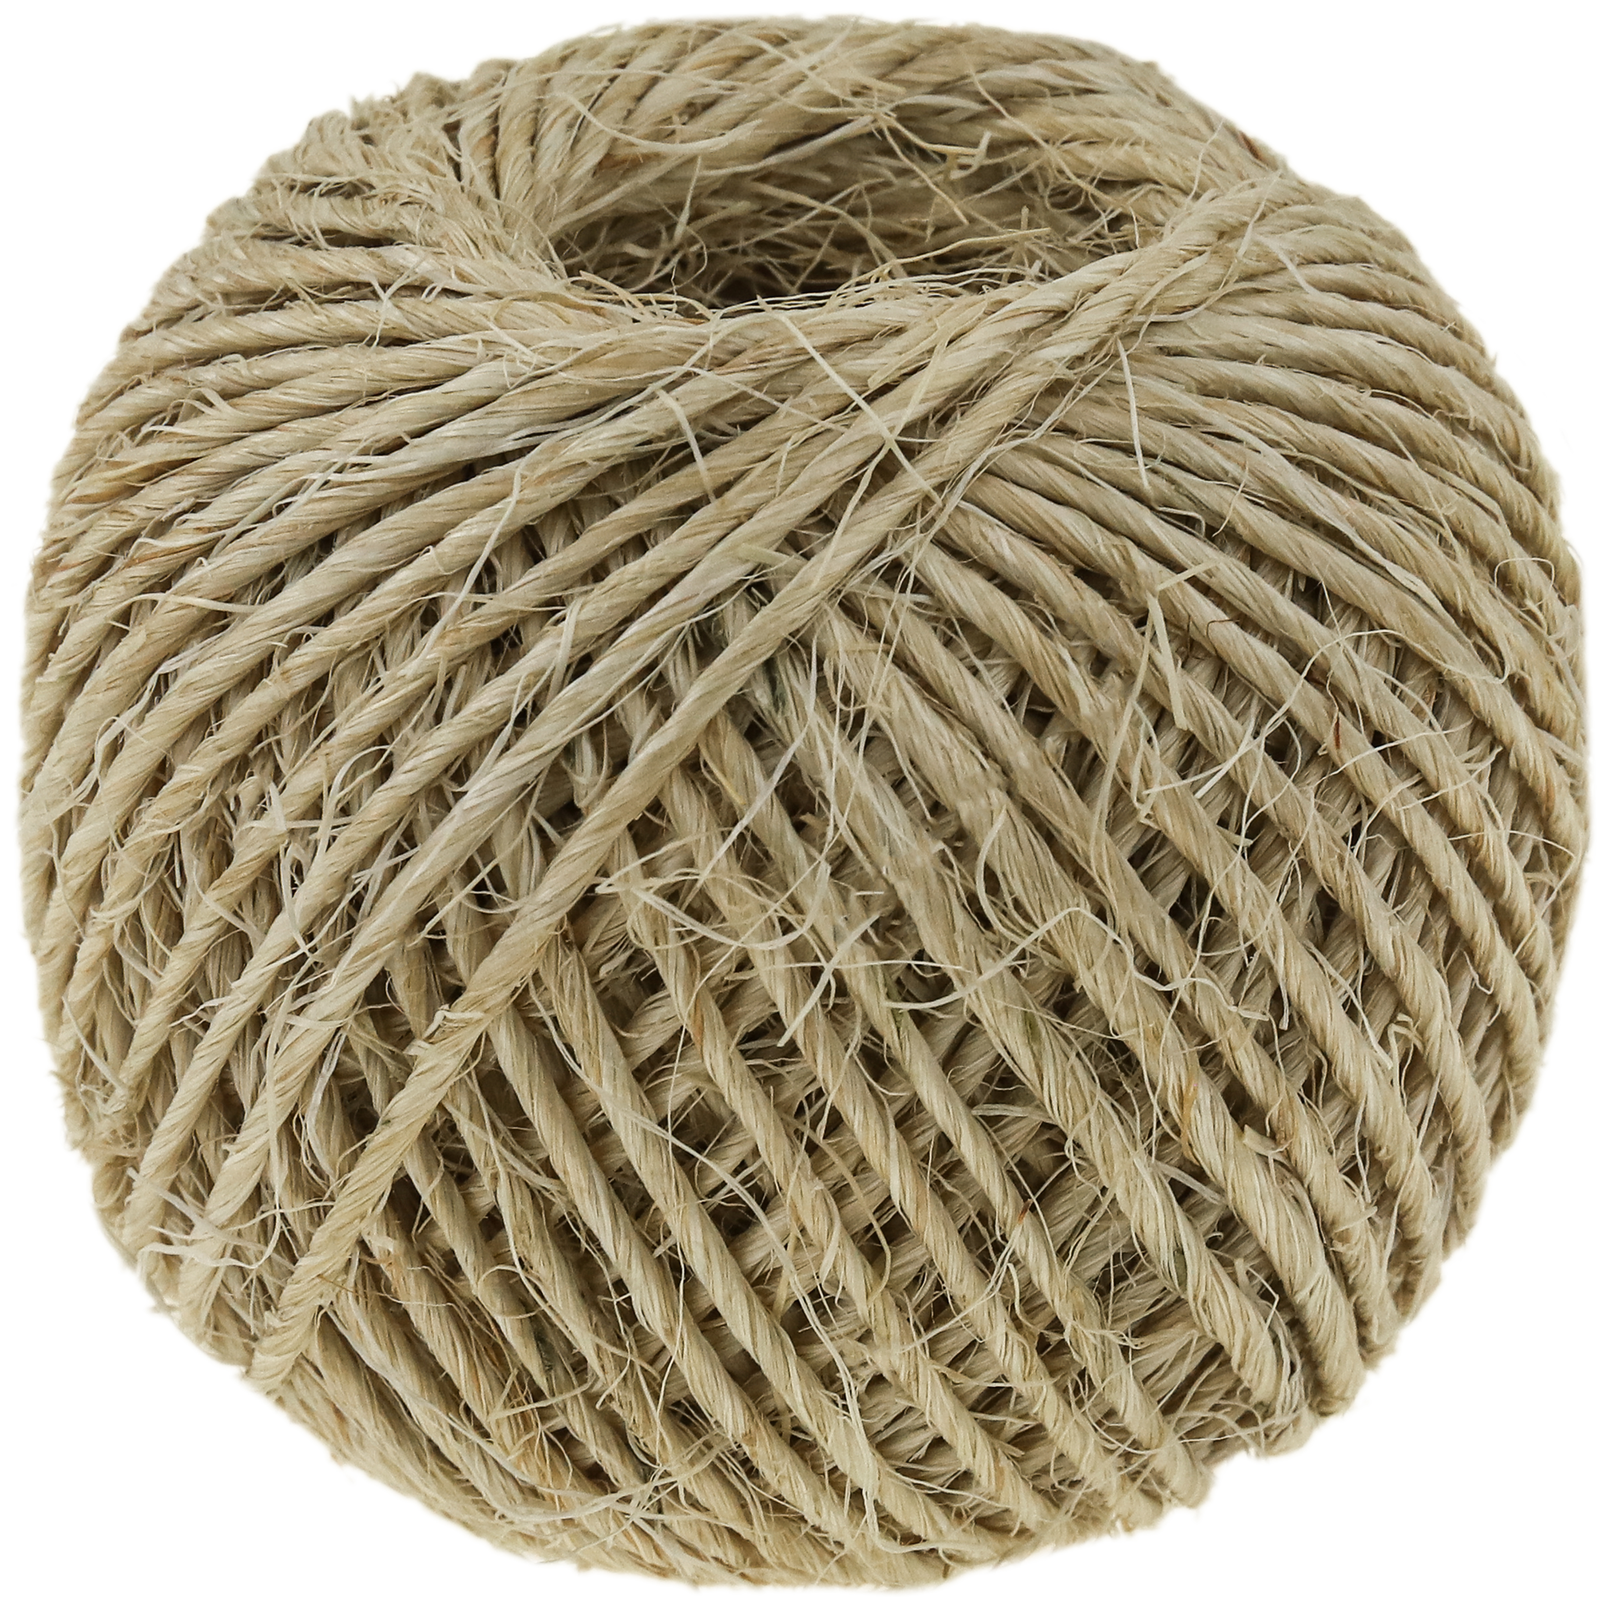 Sisal twine 1 strand 60 m x 2 mm natural - Cablematic